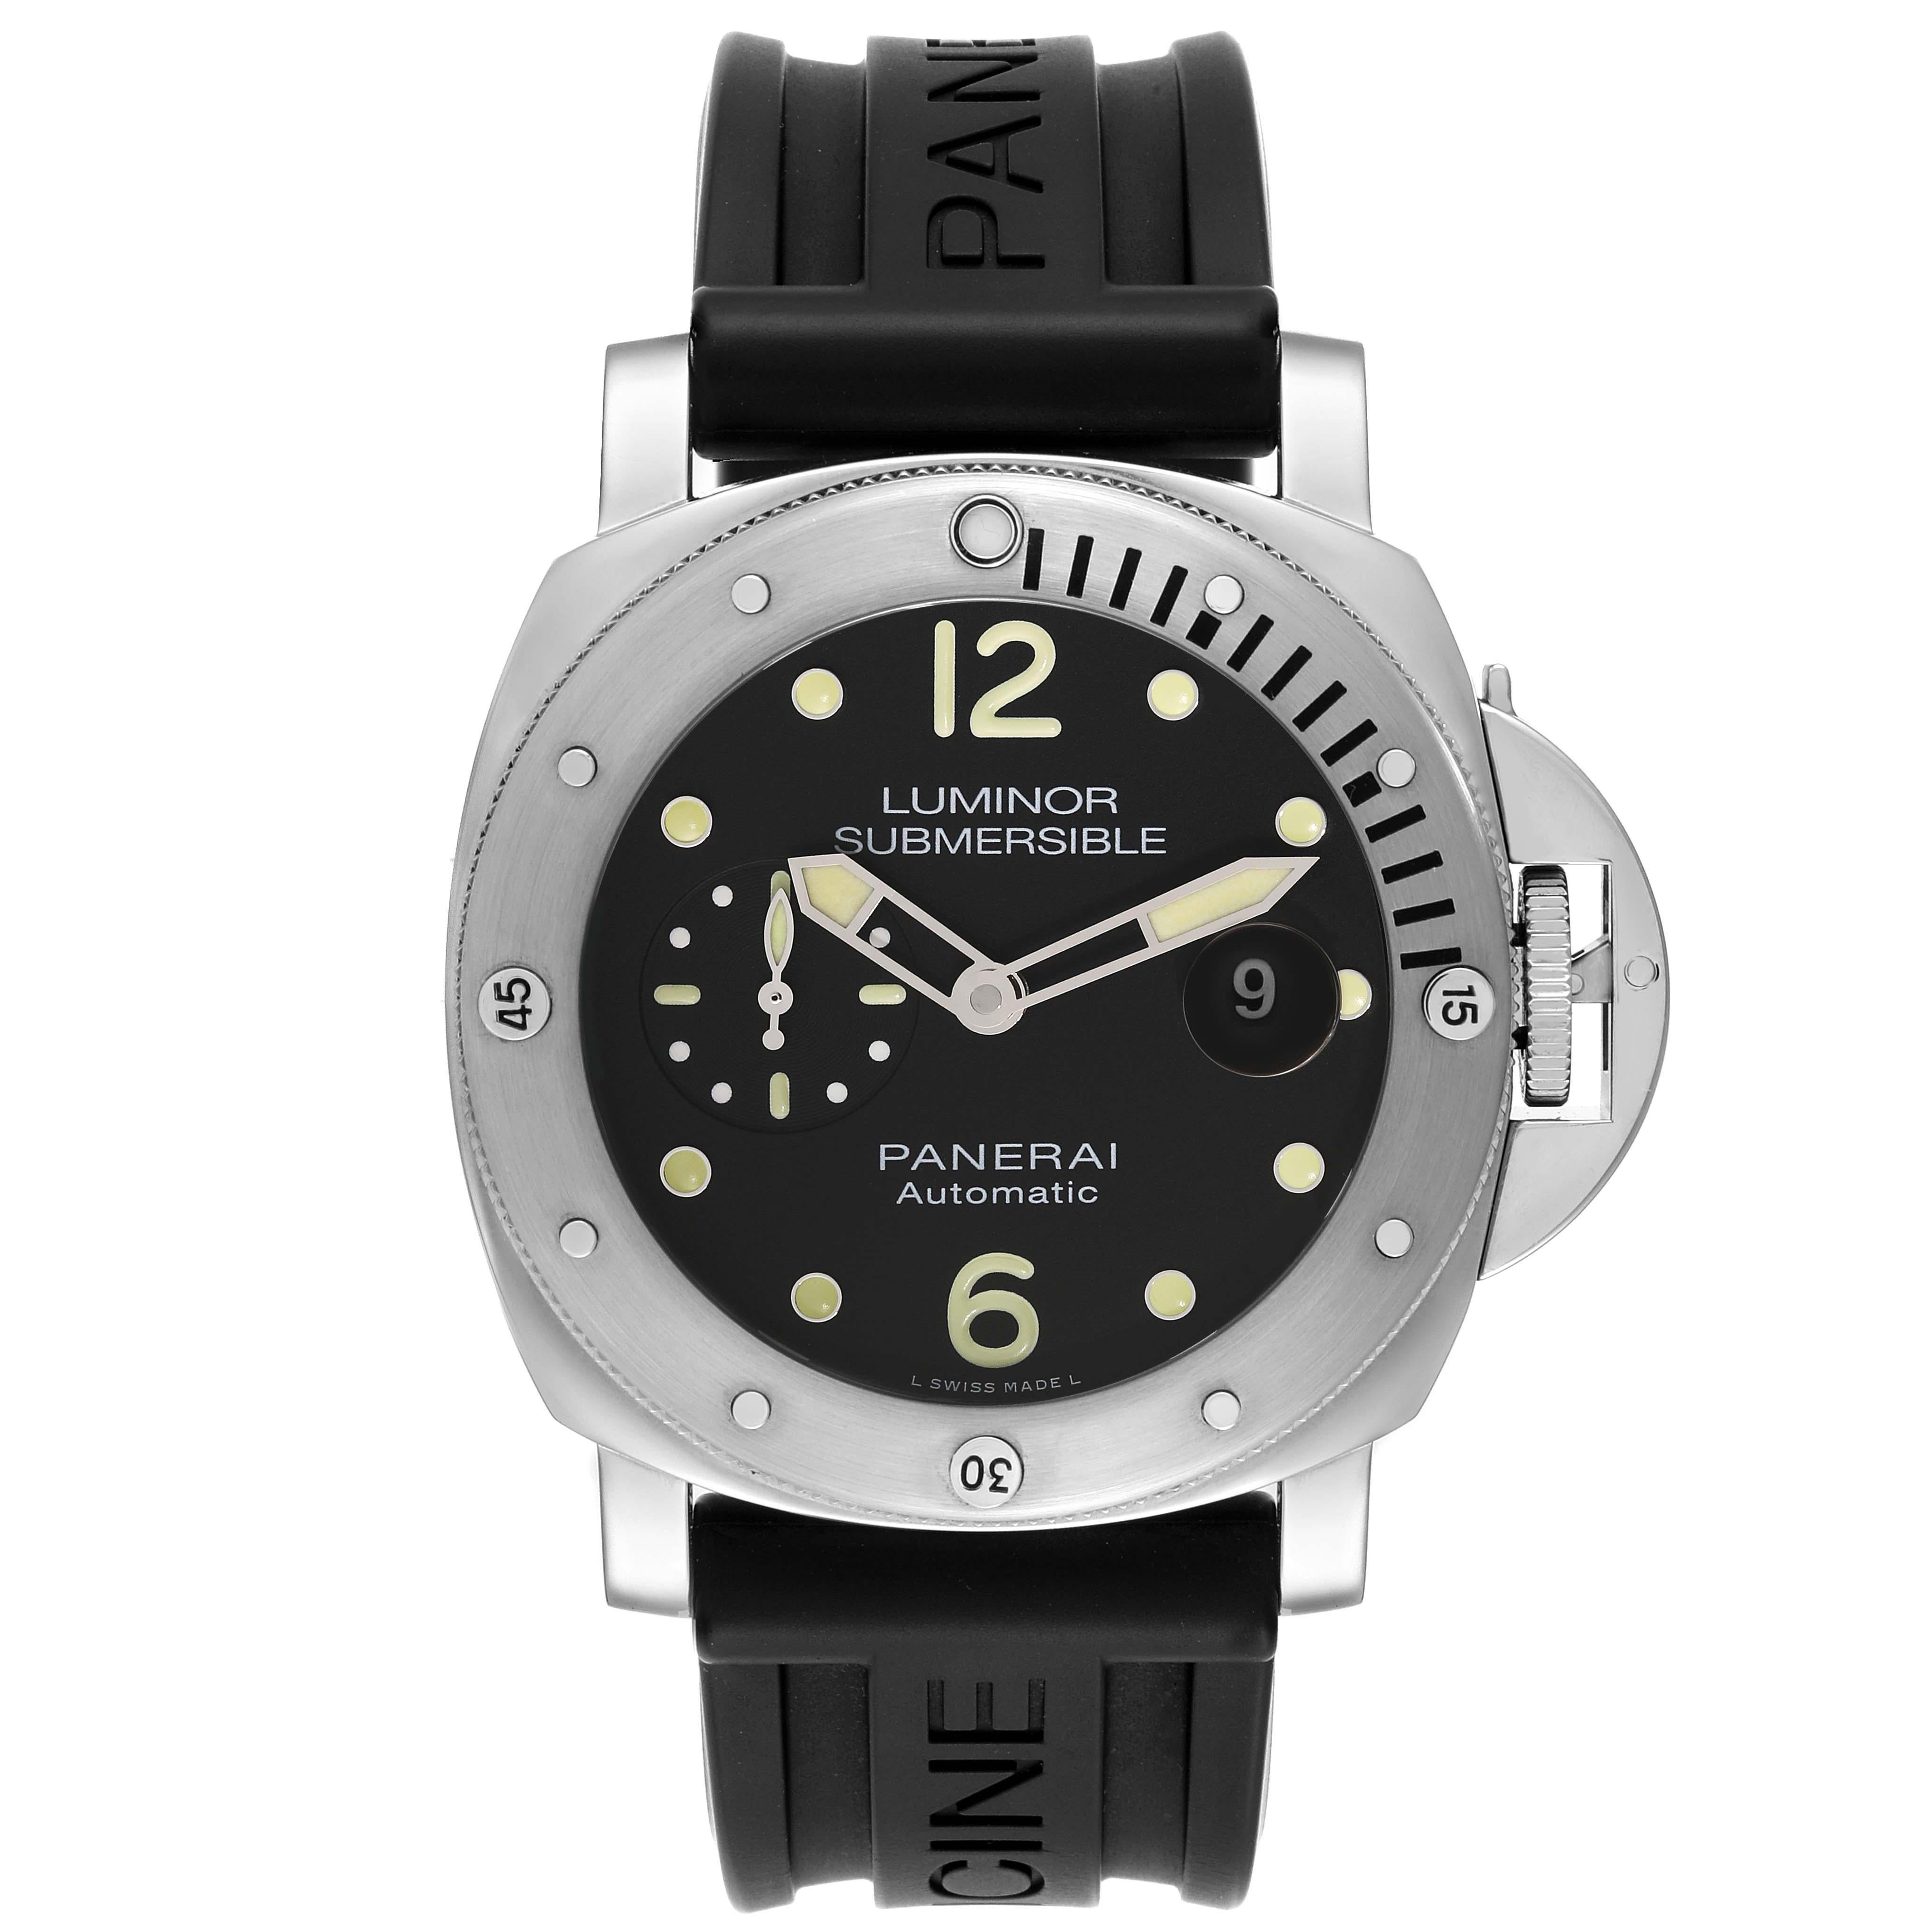 Panerai Luminor Submersible 44mm Steel Mens Watch PAM01024 Box Card. Automatic self-winding movement. Stainless steel cushion case 44.0 mm in diameter. Panerai patented crown protector. Stainless steel unidirectional rotating diver's bezel. Scratch